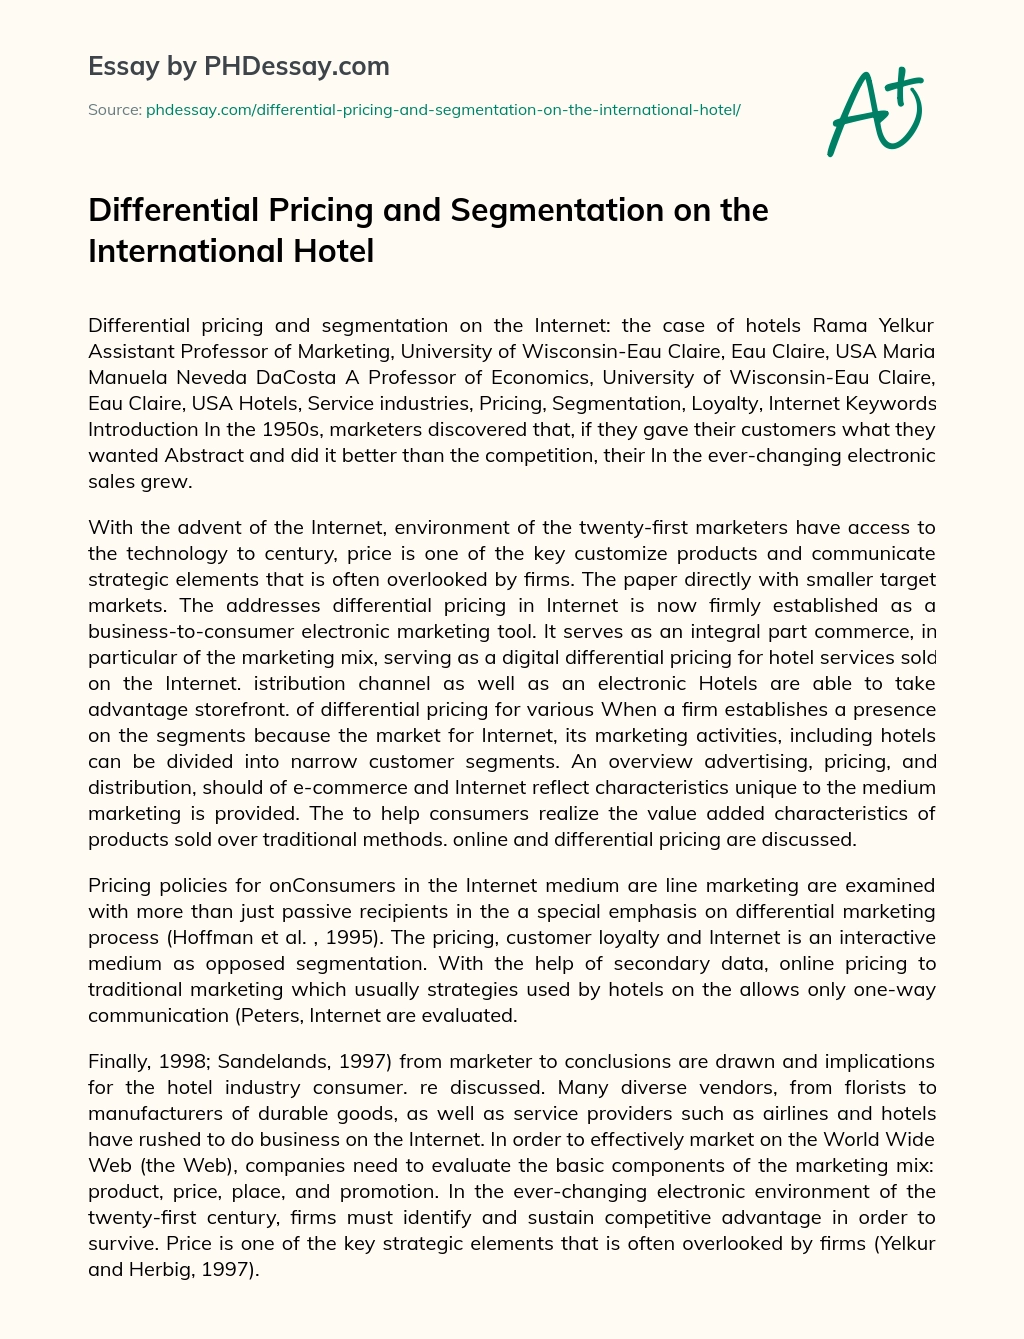 Differential Pricing and Segmentation on the International Hotel essay